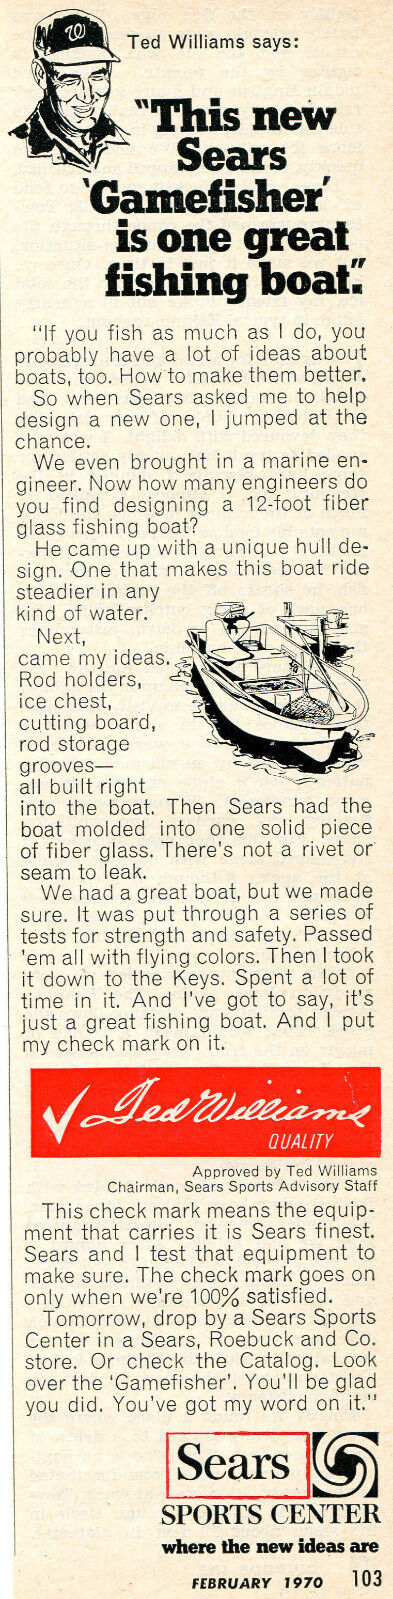 1970 Print Ad of Sears Sports Center Ted Williams \